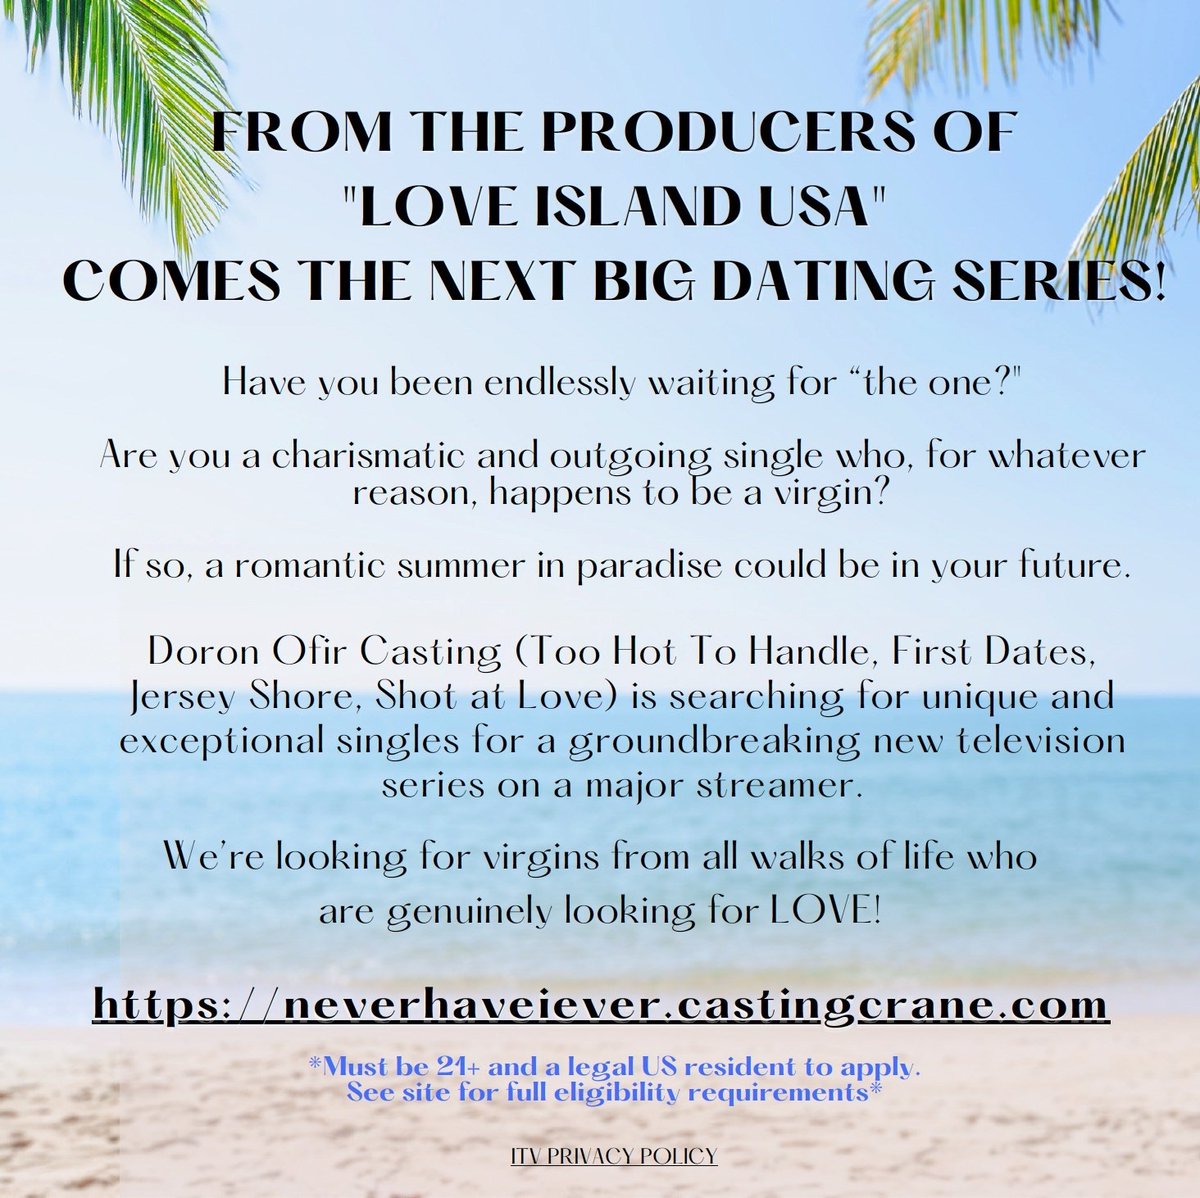 Casting Alert!  Never Have I Ever - the next BIG dating series from the producers of Love Island USA is NOW CASTING!  Are you ready for the adventure of a lifetime? Discover more and apply now at AuditionList.io!  #CastingCall #NeverHaveIEver #DatingShow #ApplyNow